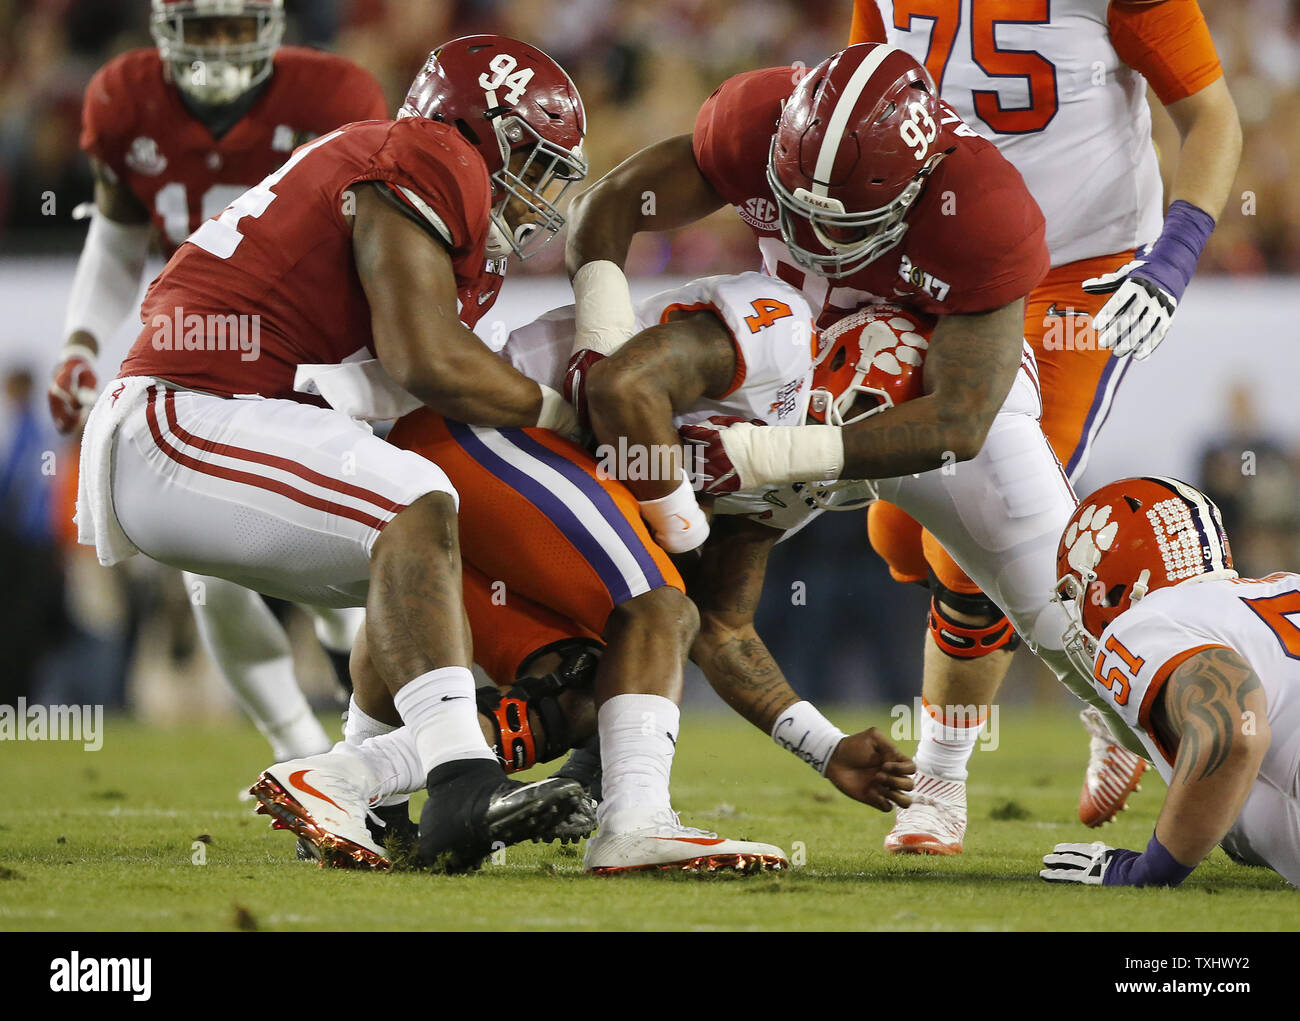 Clemson Tigers quarterback Deshaun Watson (4) is smothered on a sack by Alabama Crimson Tide defensive linemean Da'Ron Payne (94) and Jonathan Allen (93) in the first quarter of the 2017 College Football Playoff National Championship, in Tampa, Florida, on January 9, 2017. Photo by Mark Wallheiser/UPI Stock Photo